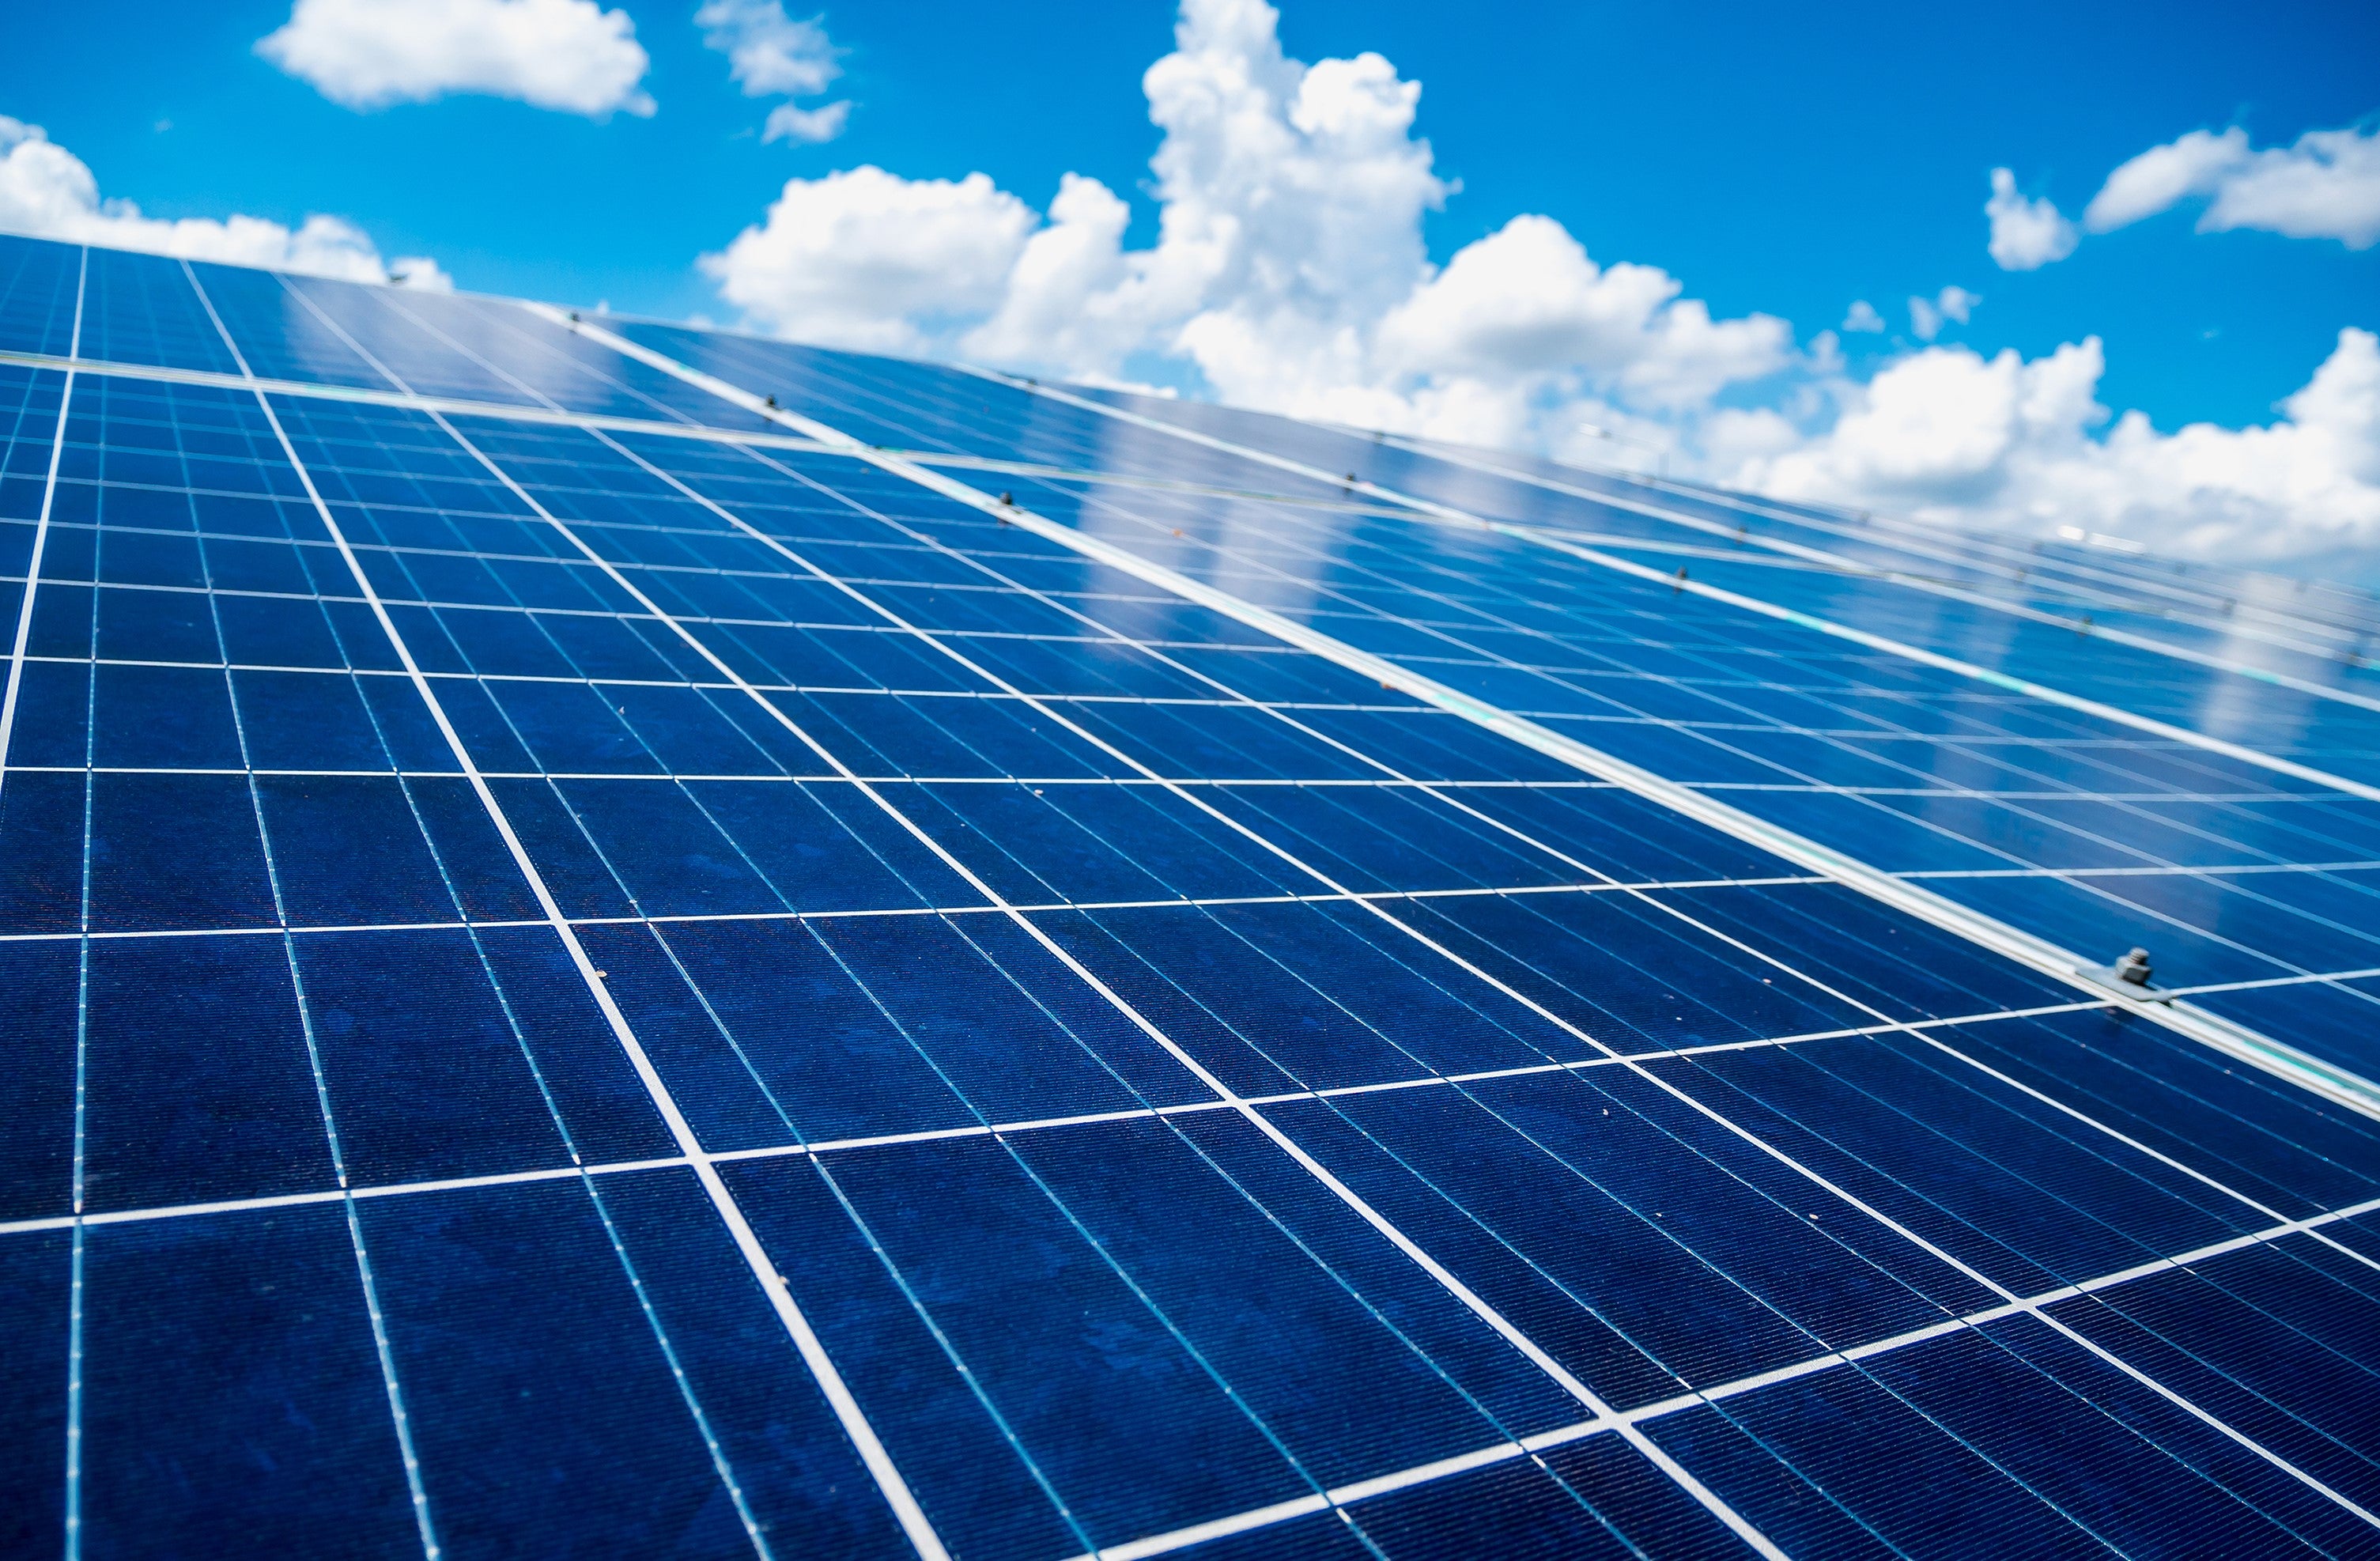 idb-invest-finances-an-80mw-photovoltaic-solar-plant-in-mexico-with-x